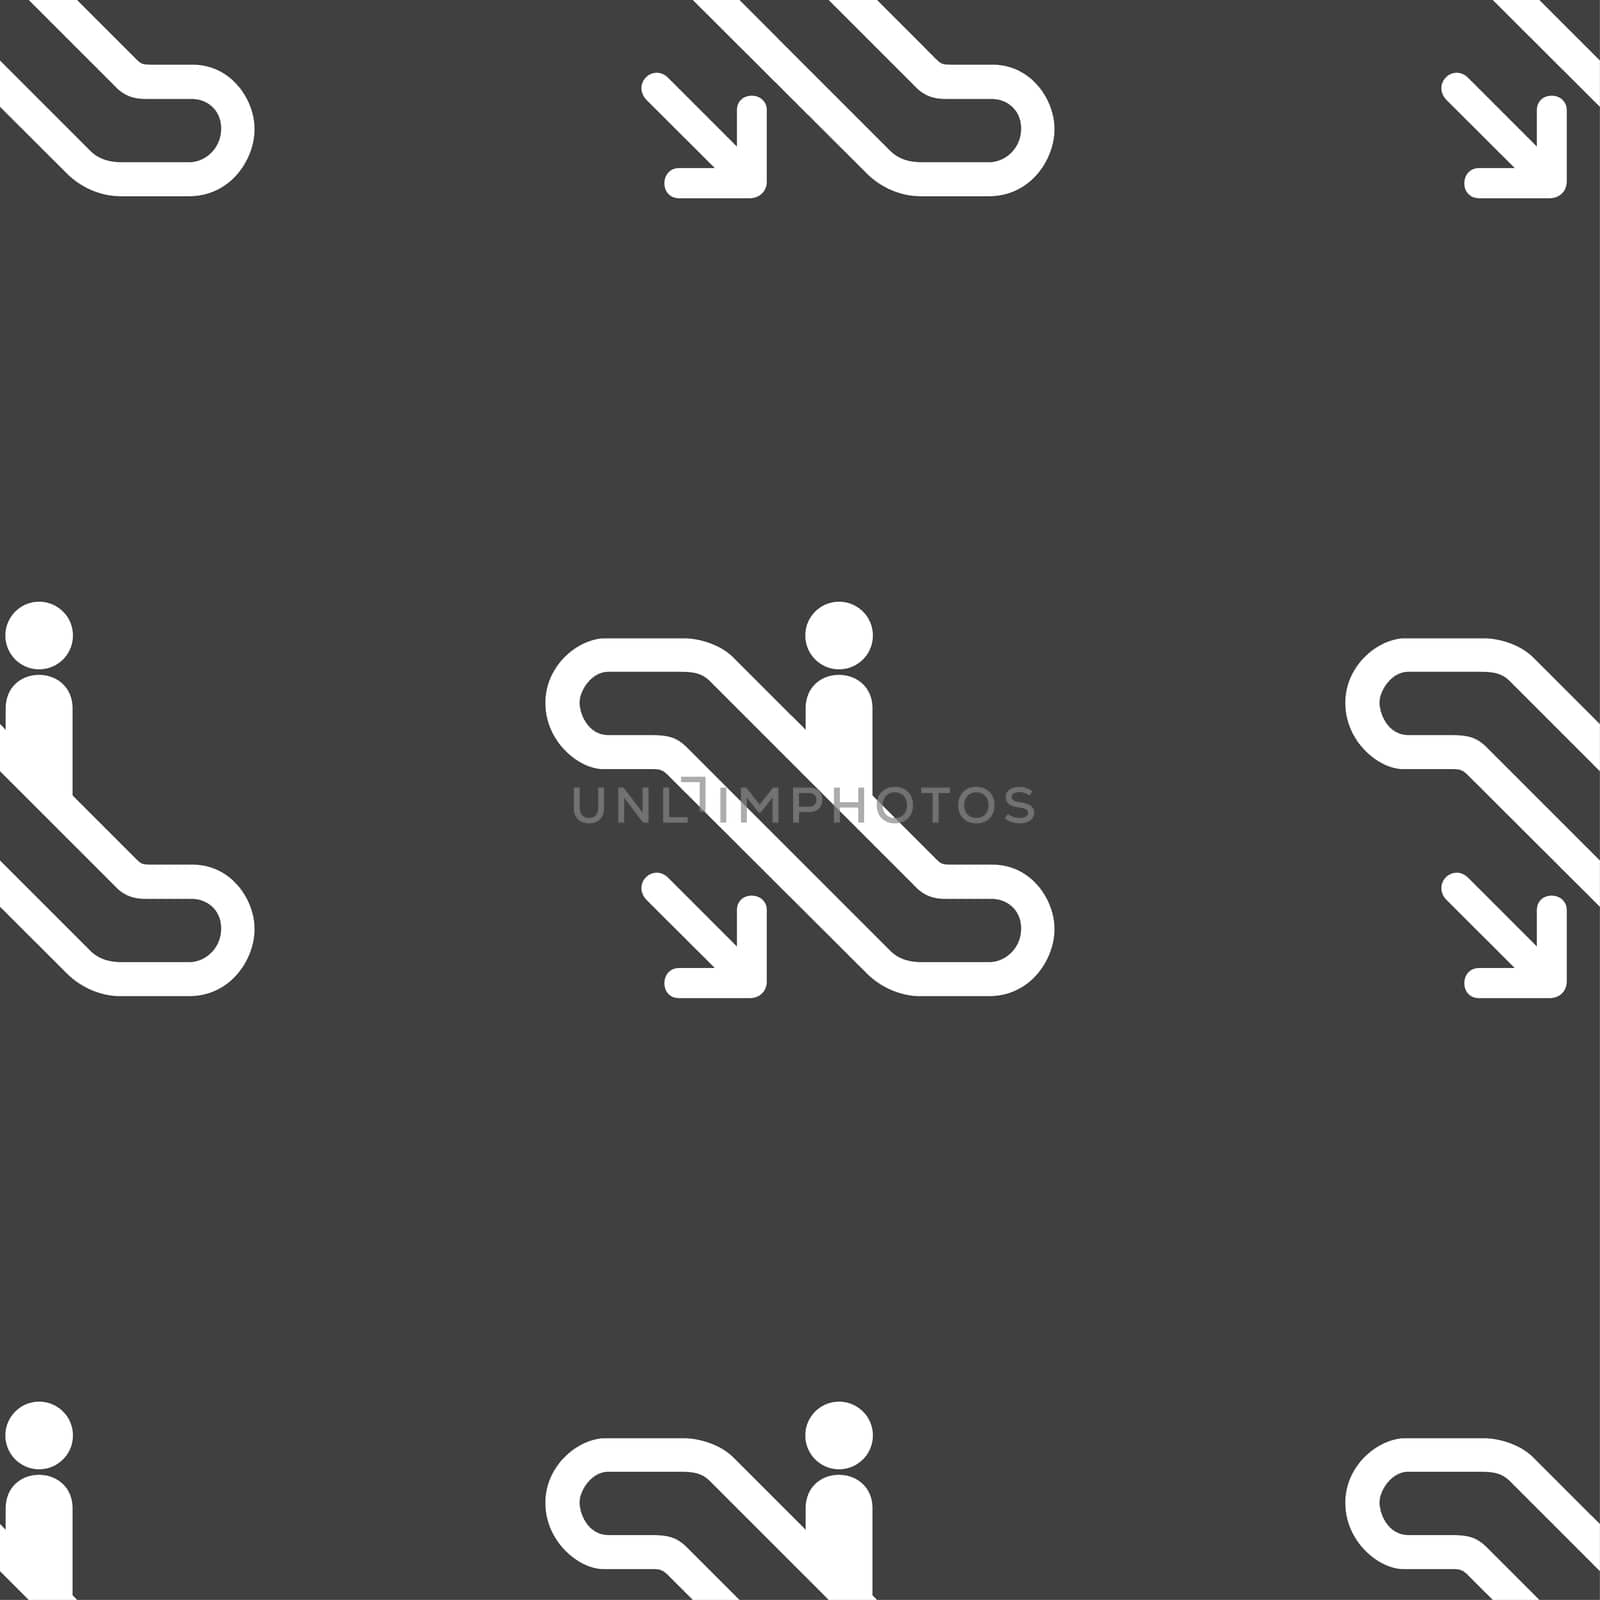 elevator, Escalator, Staircase icon sign. Seamless pattern on a gray background. illustration